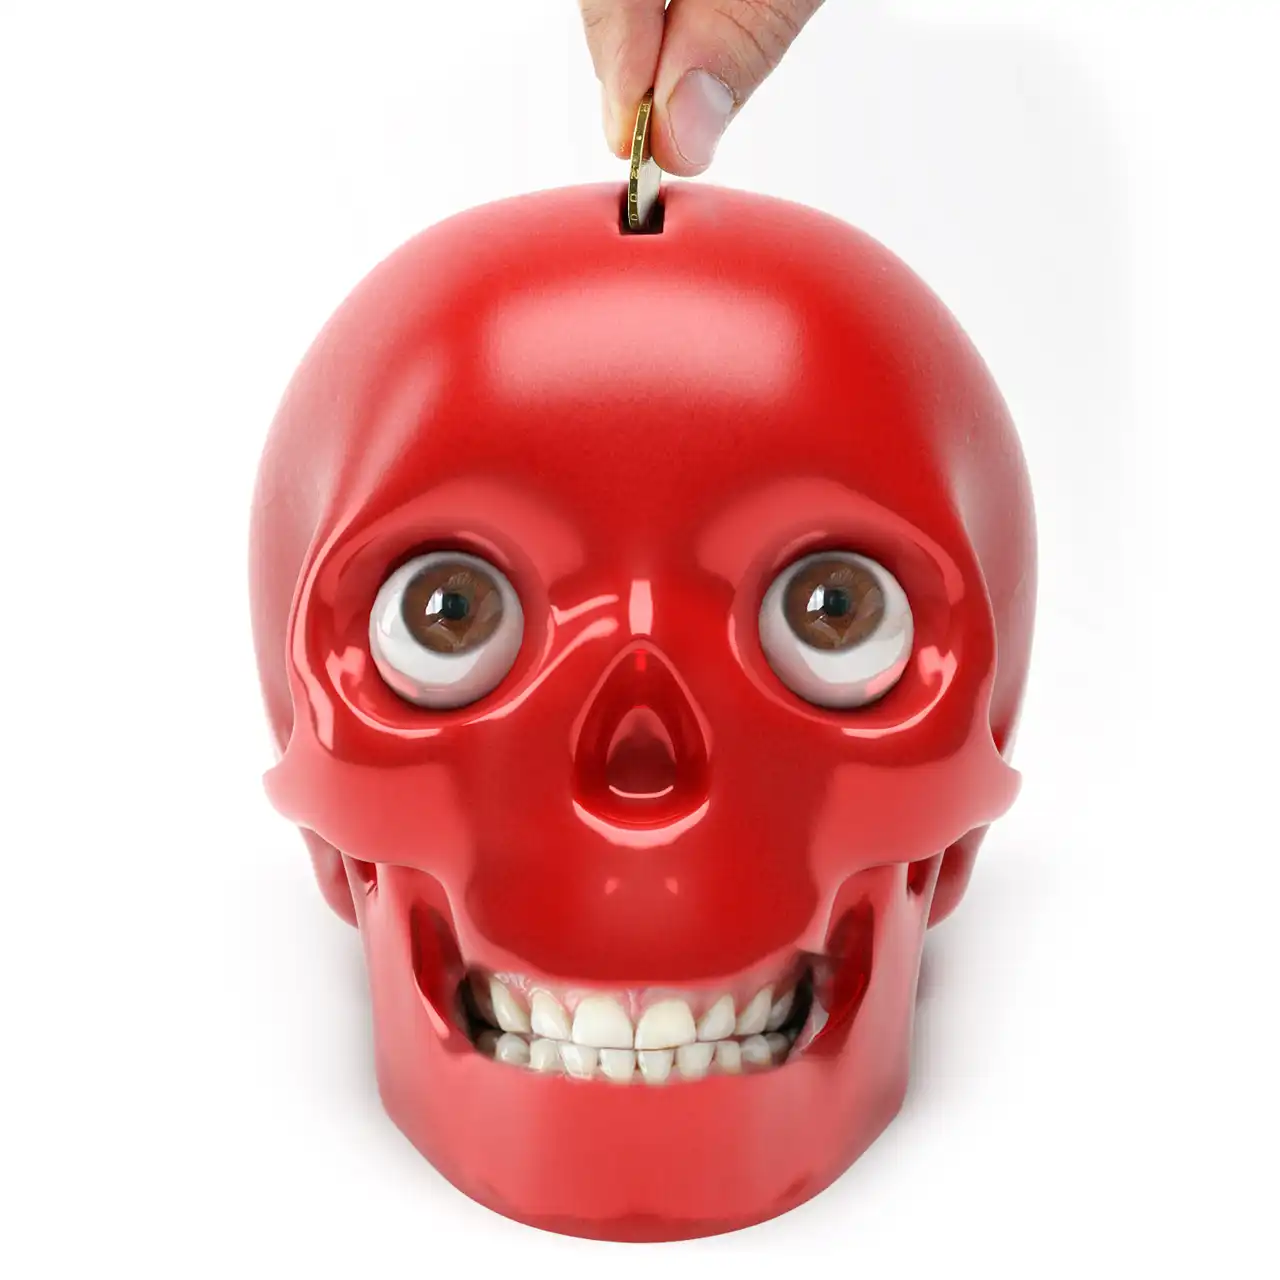 Illustration with a hand putting a coin in a piggy bank in the form of a skull with real human eyes and teeth. A 3d model of ceramic money box is used.